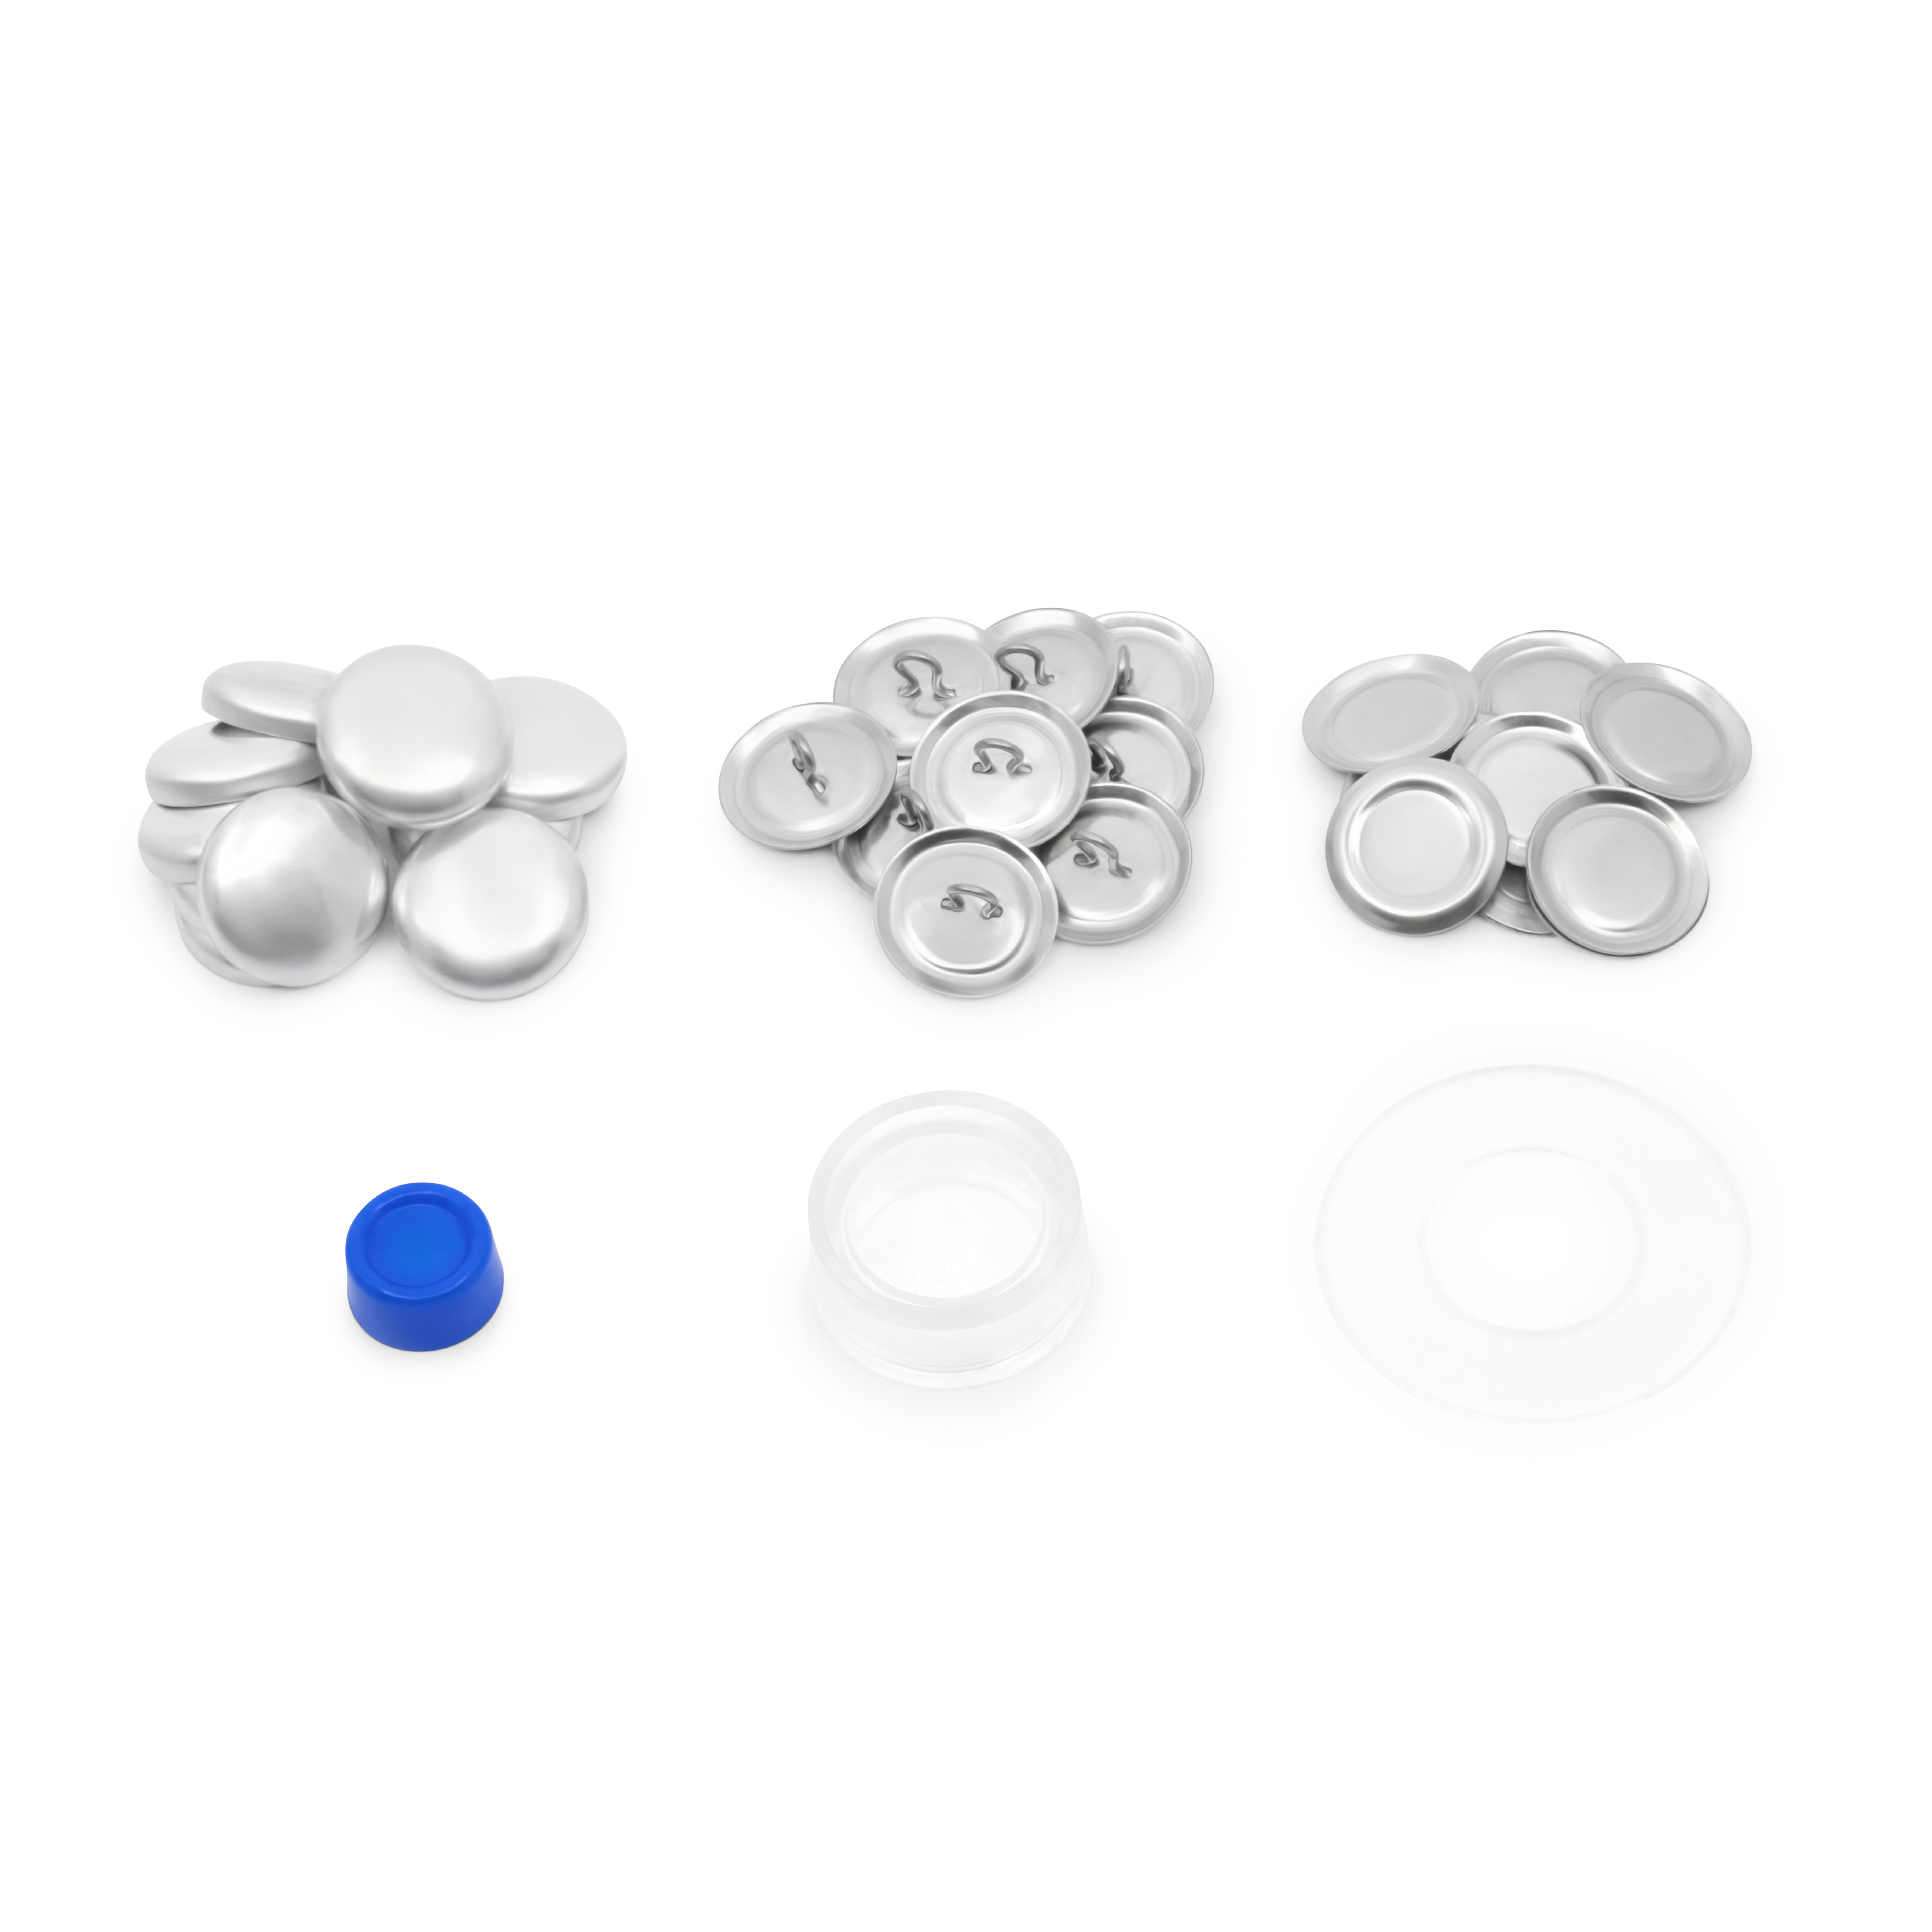 Dritz 14-36 Cover Button Kit with Tools, Size 36 - 7/8-Inch, 4-Piece